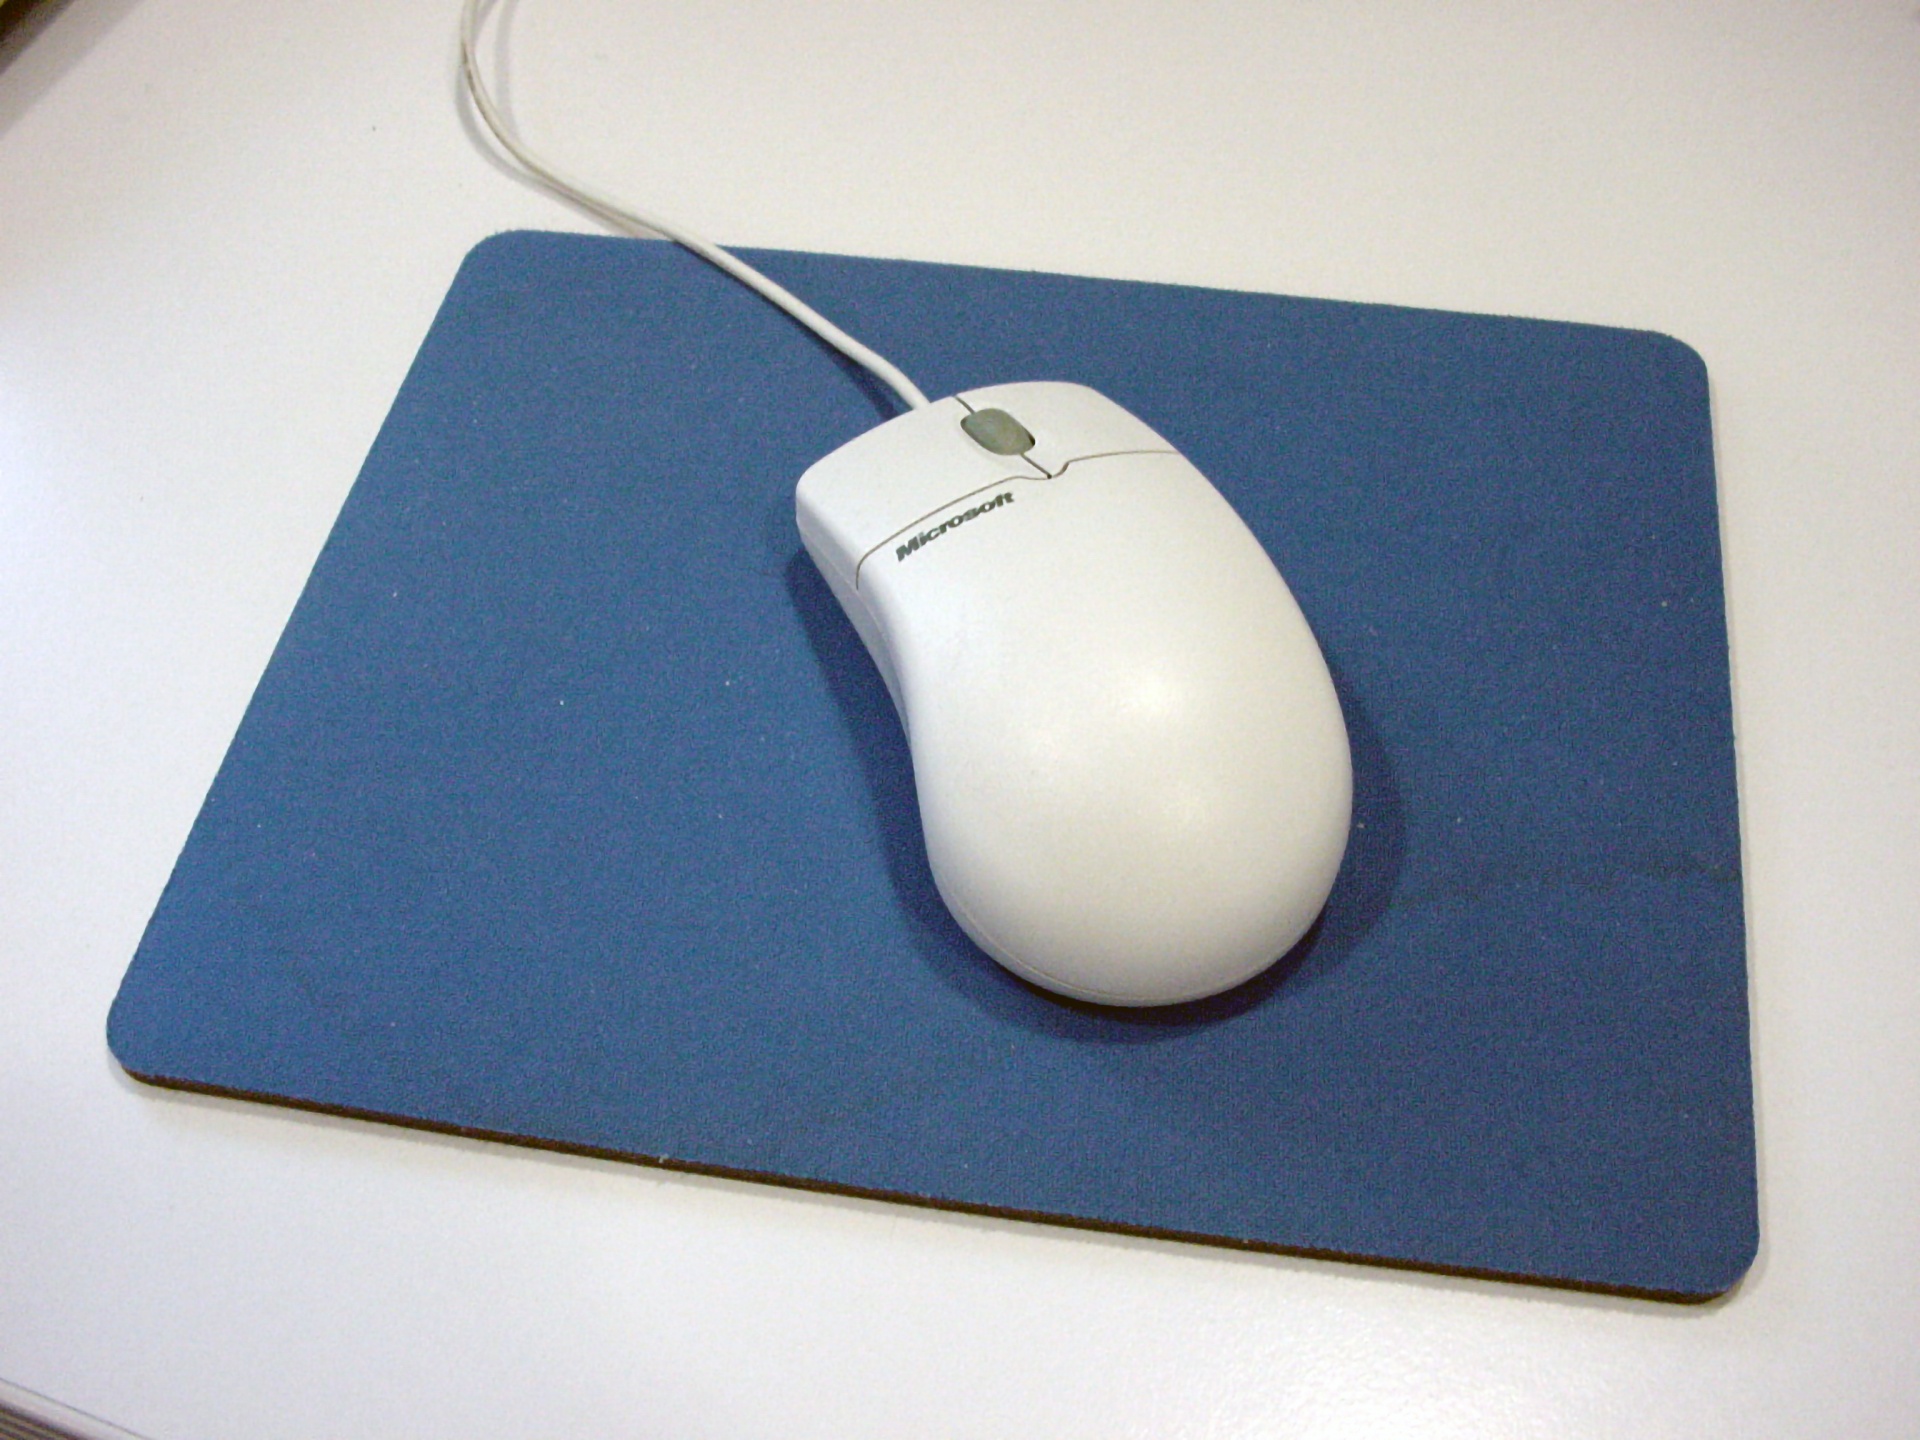 Ranking of the best mouse pads for 2020